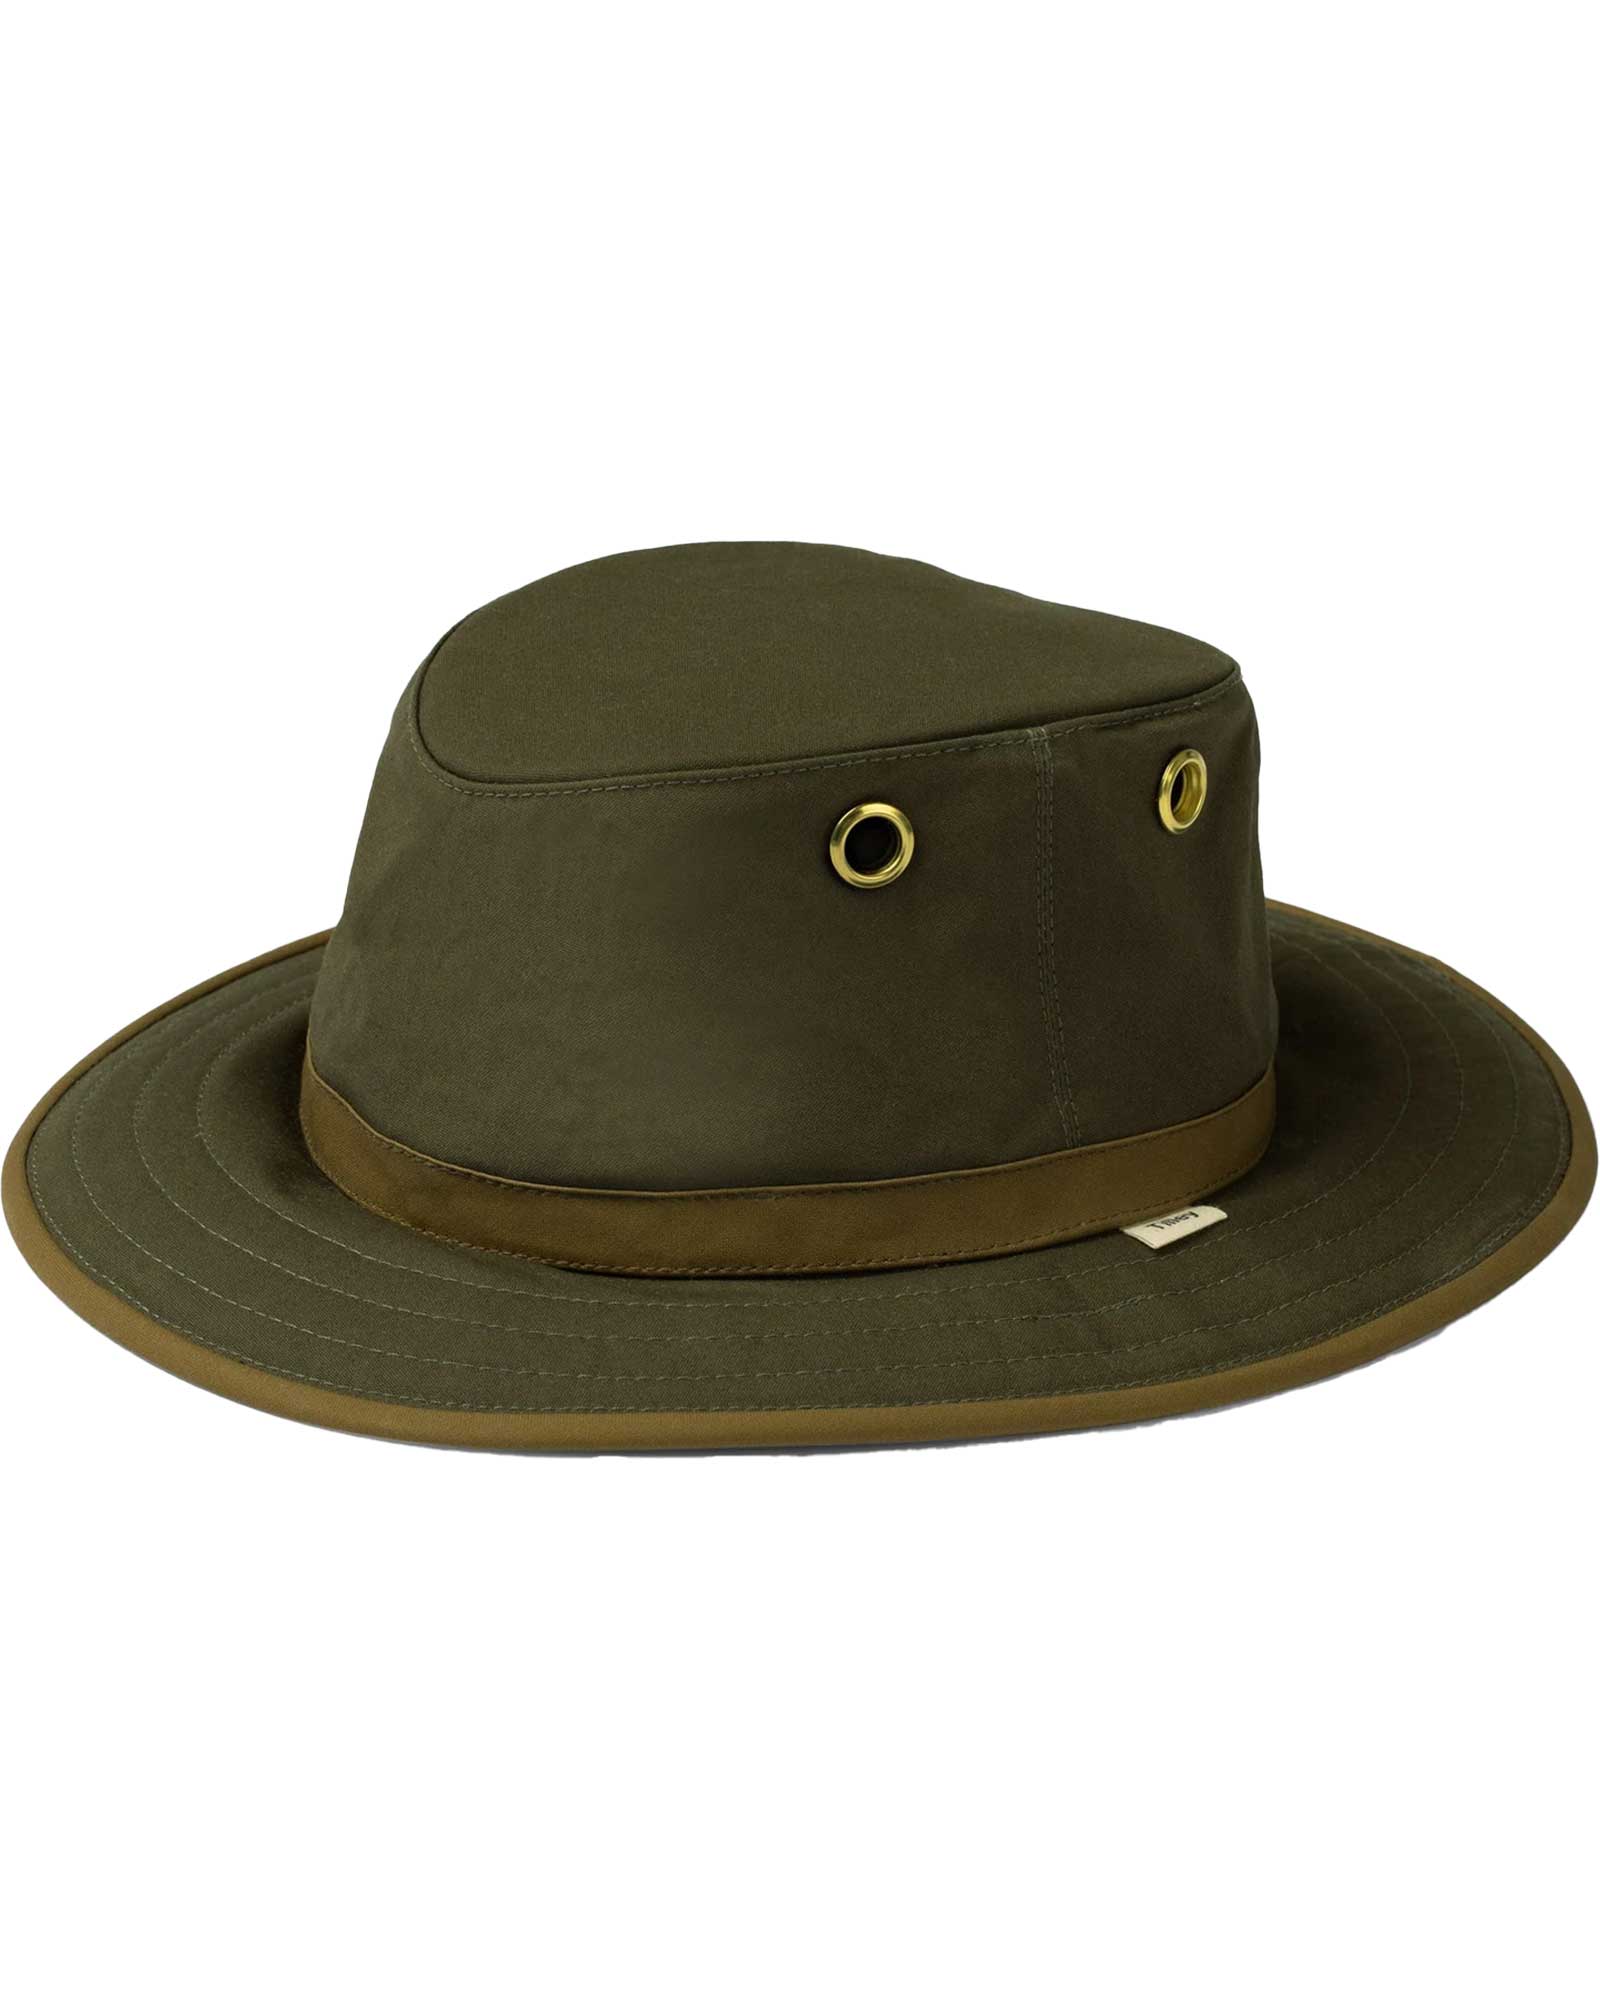 Tilley Outback Waxed Cotton Hat - Green 7 3/8